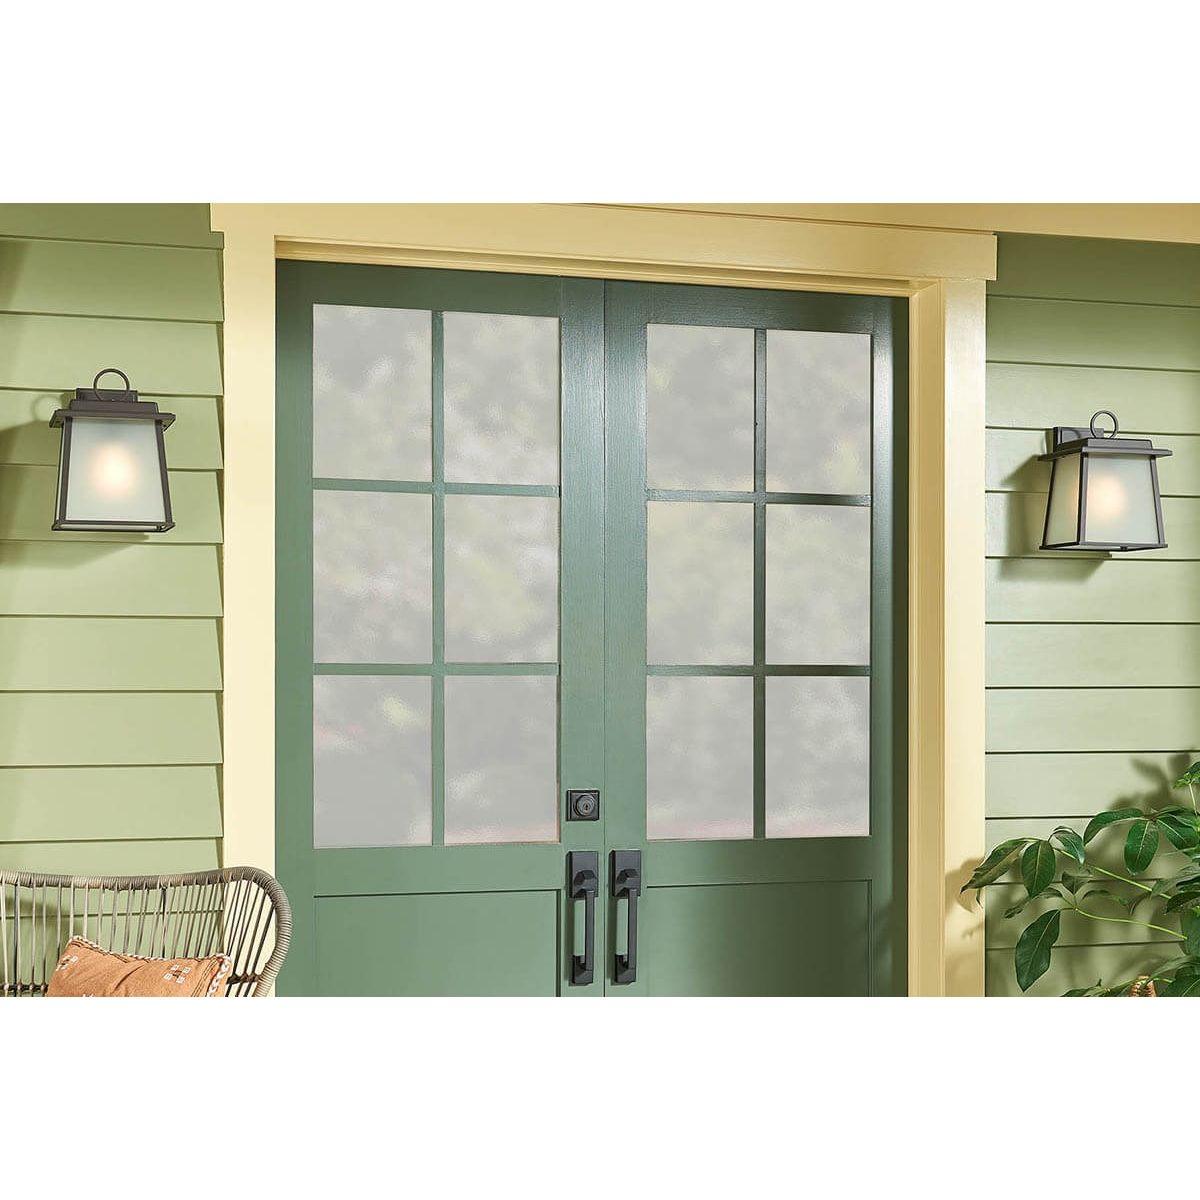 Noward 12 in. Outdoor Wall Sconce - Bees Lighting